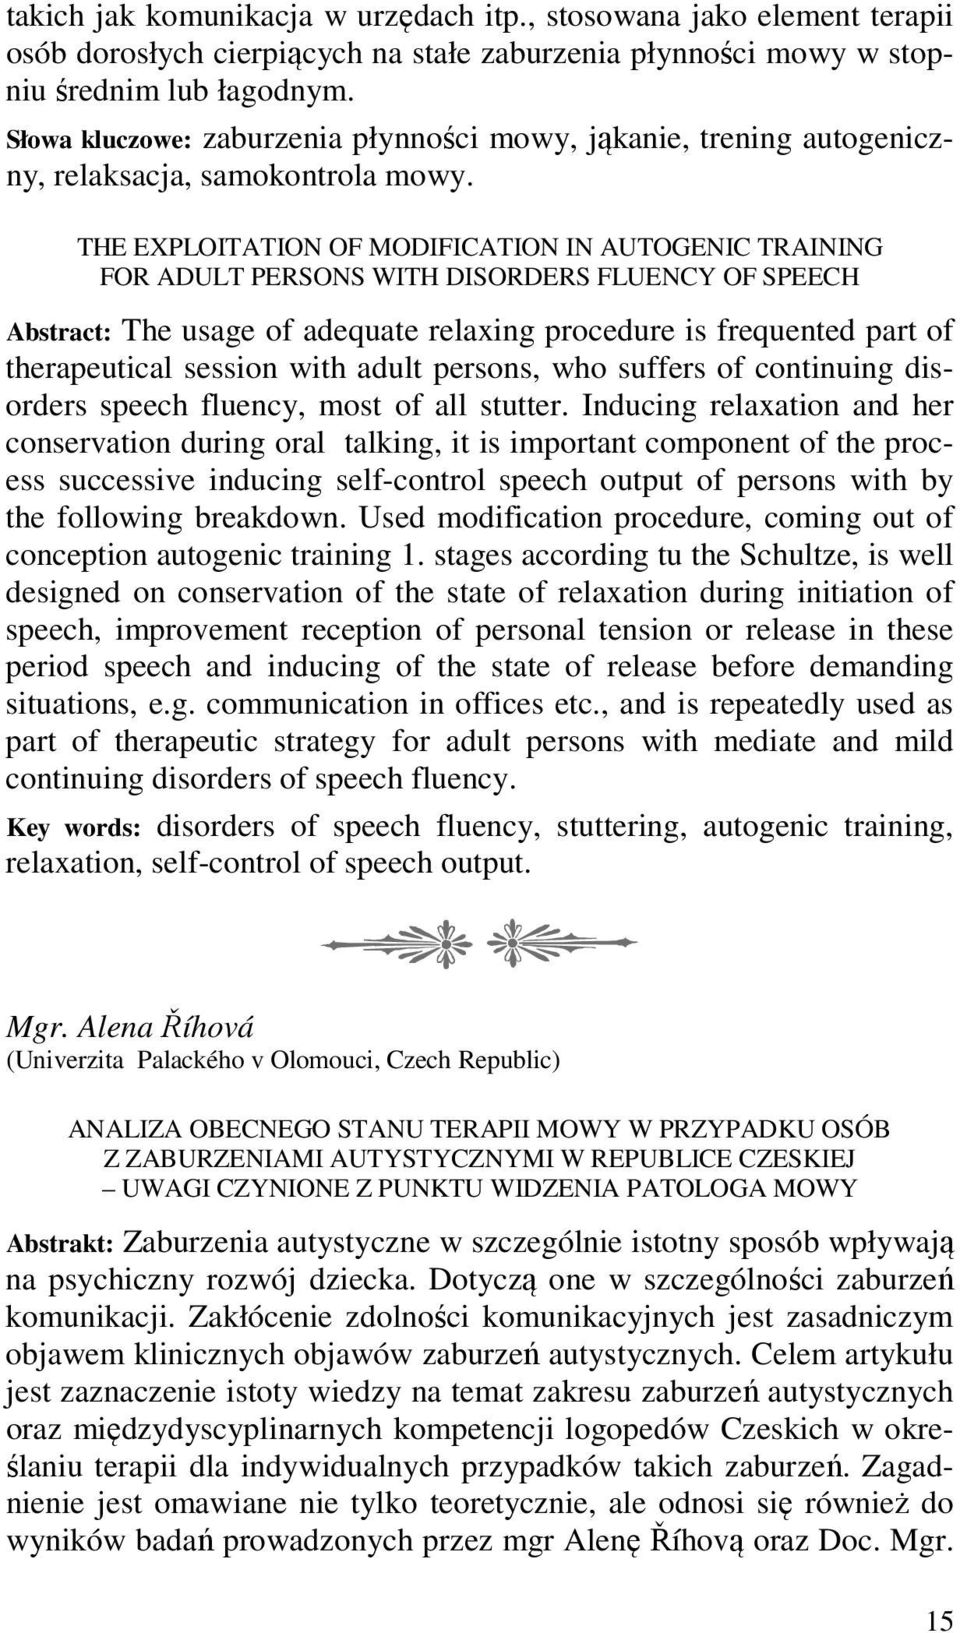 THE EXPLOITATION OF MODIFICATION IN AUTOGENIC TRAINING FOR ADULT PERSONS WITH DISORDERS FLUENCY OF SPEECH Abstract: The usage of adequate relaxing procedure is frequented part of therapeutical